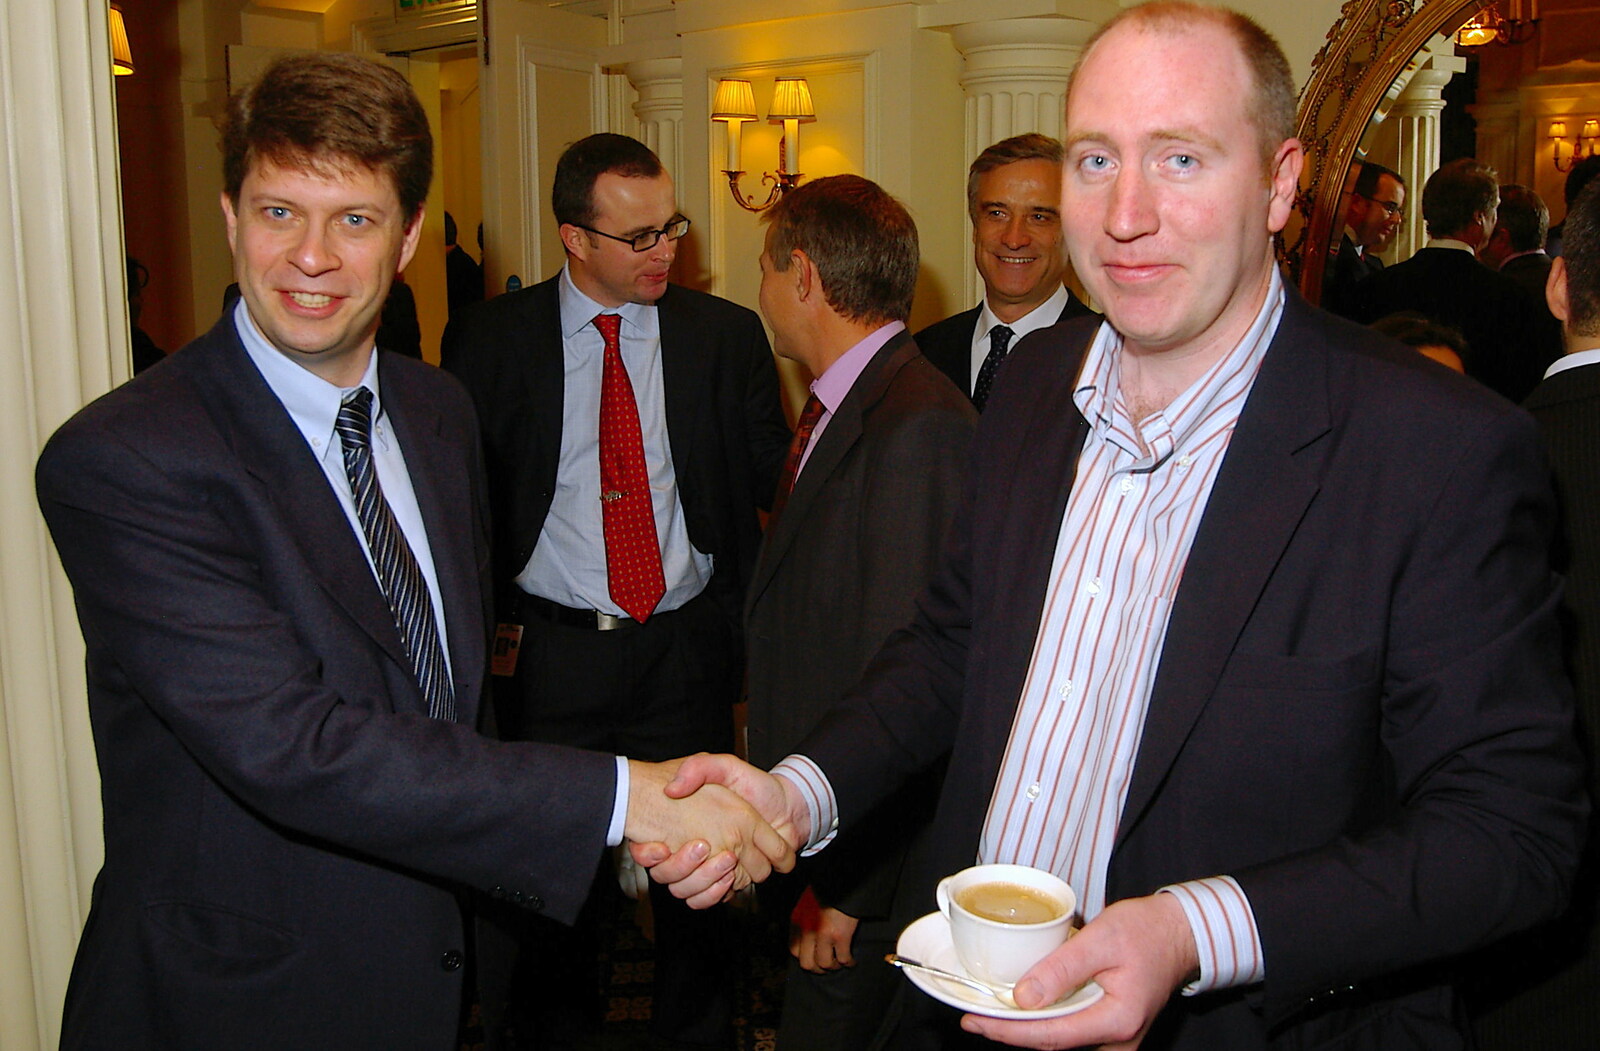 Angelo and Russel 'Rusty' McHugh from Qualcomm Europe All-Hands at the Berkeley Hotel, London - 9th November 2005